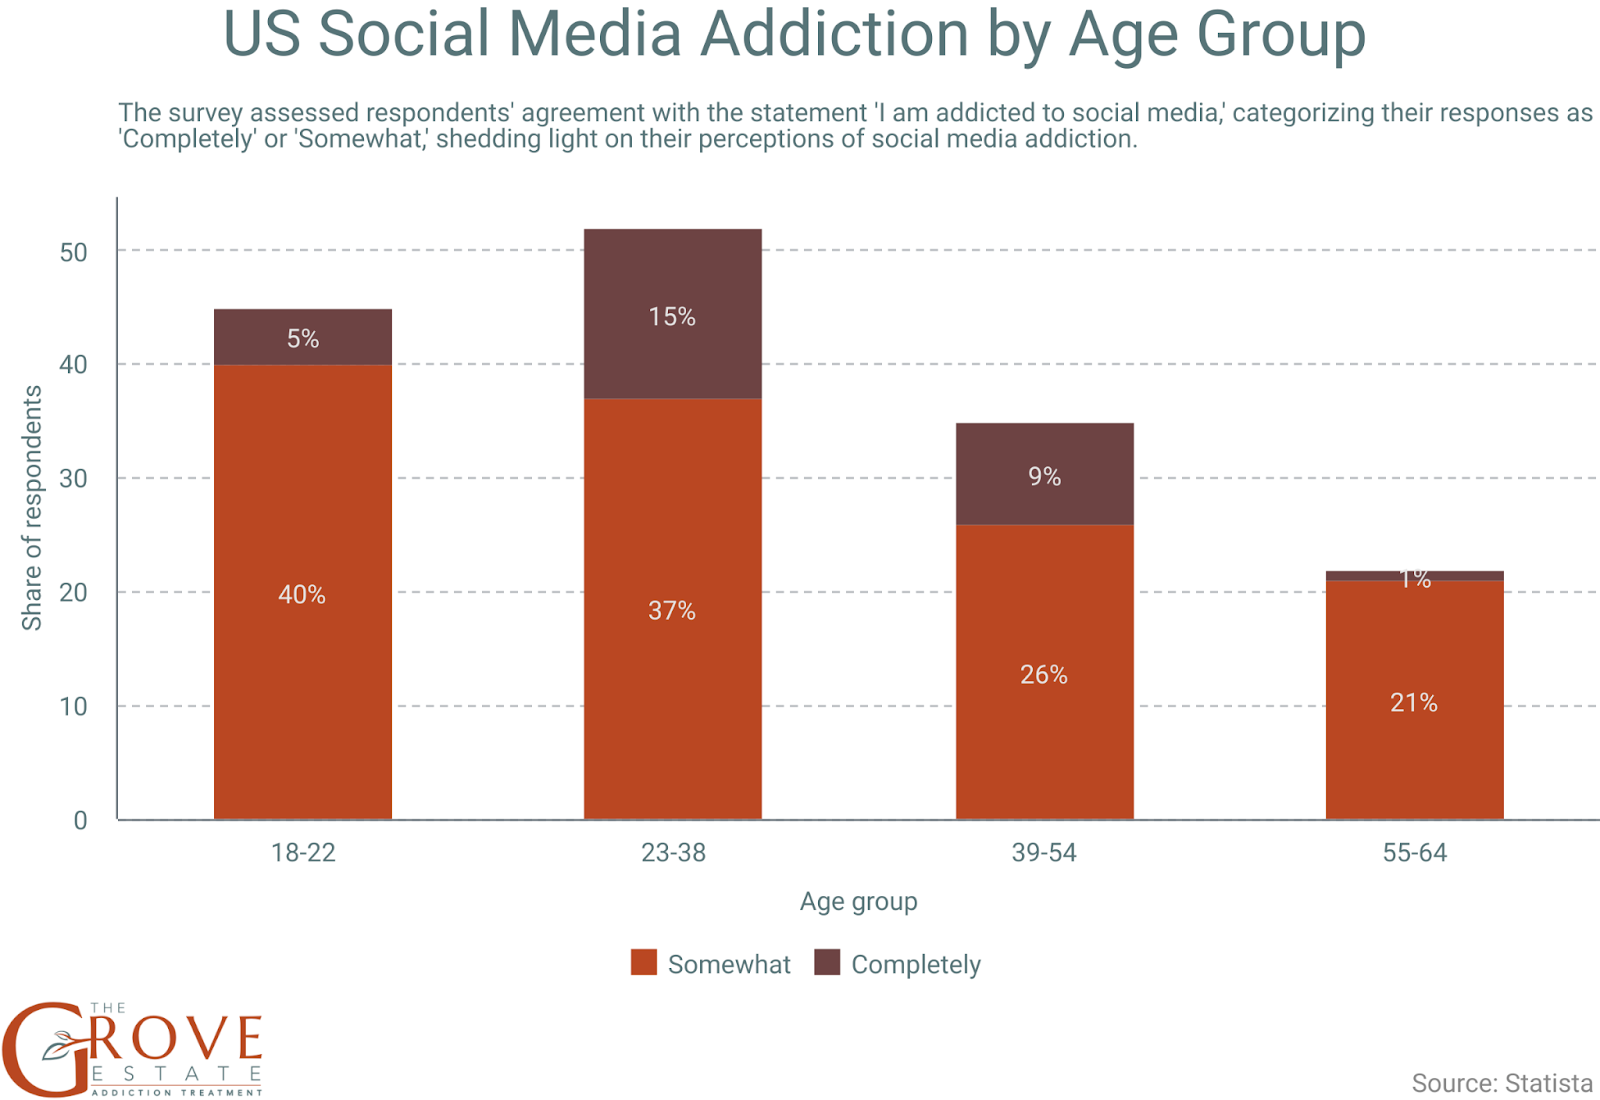 graph of us social media by age group